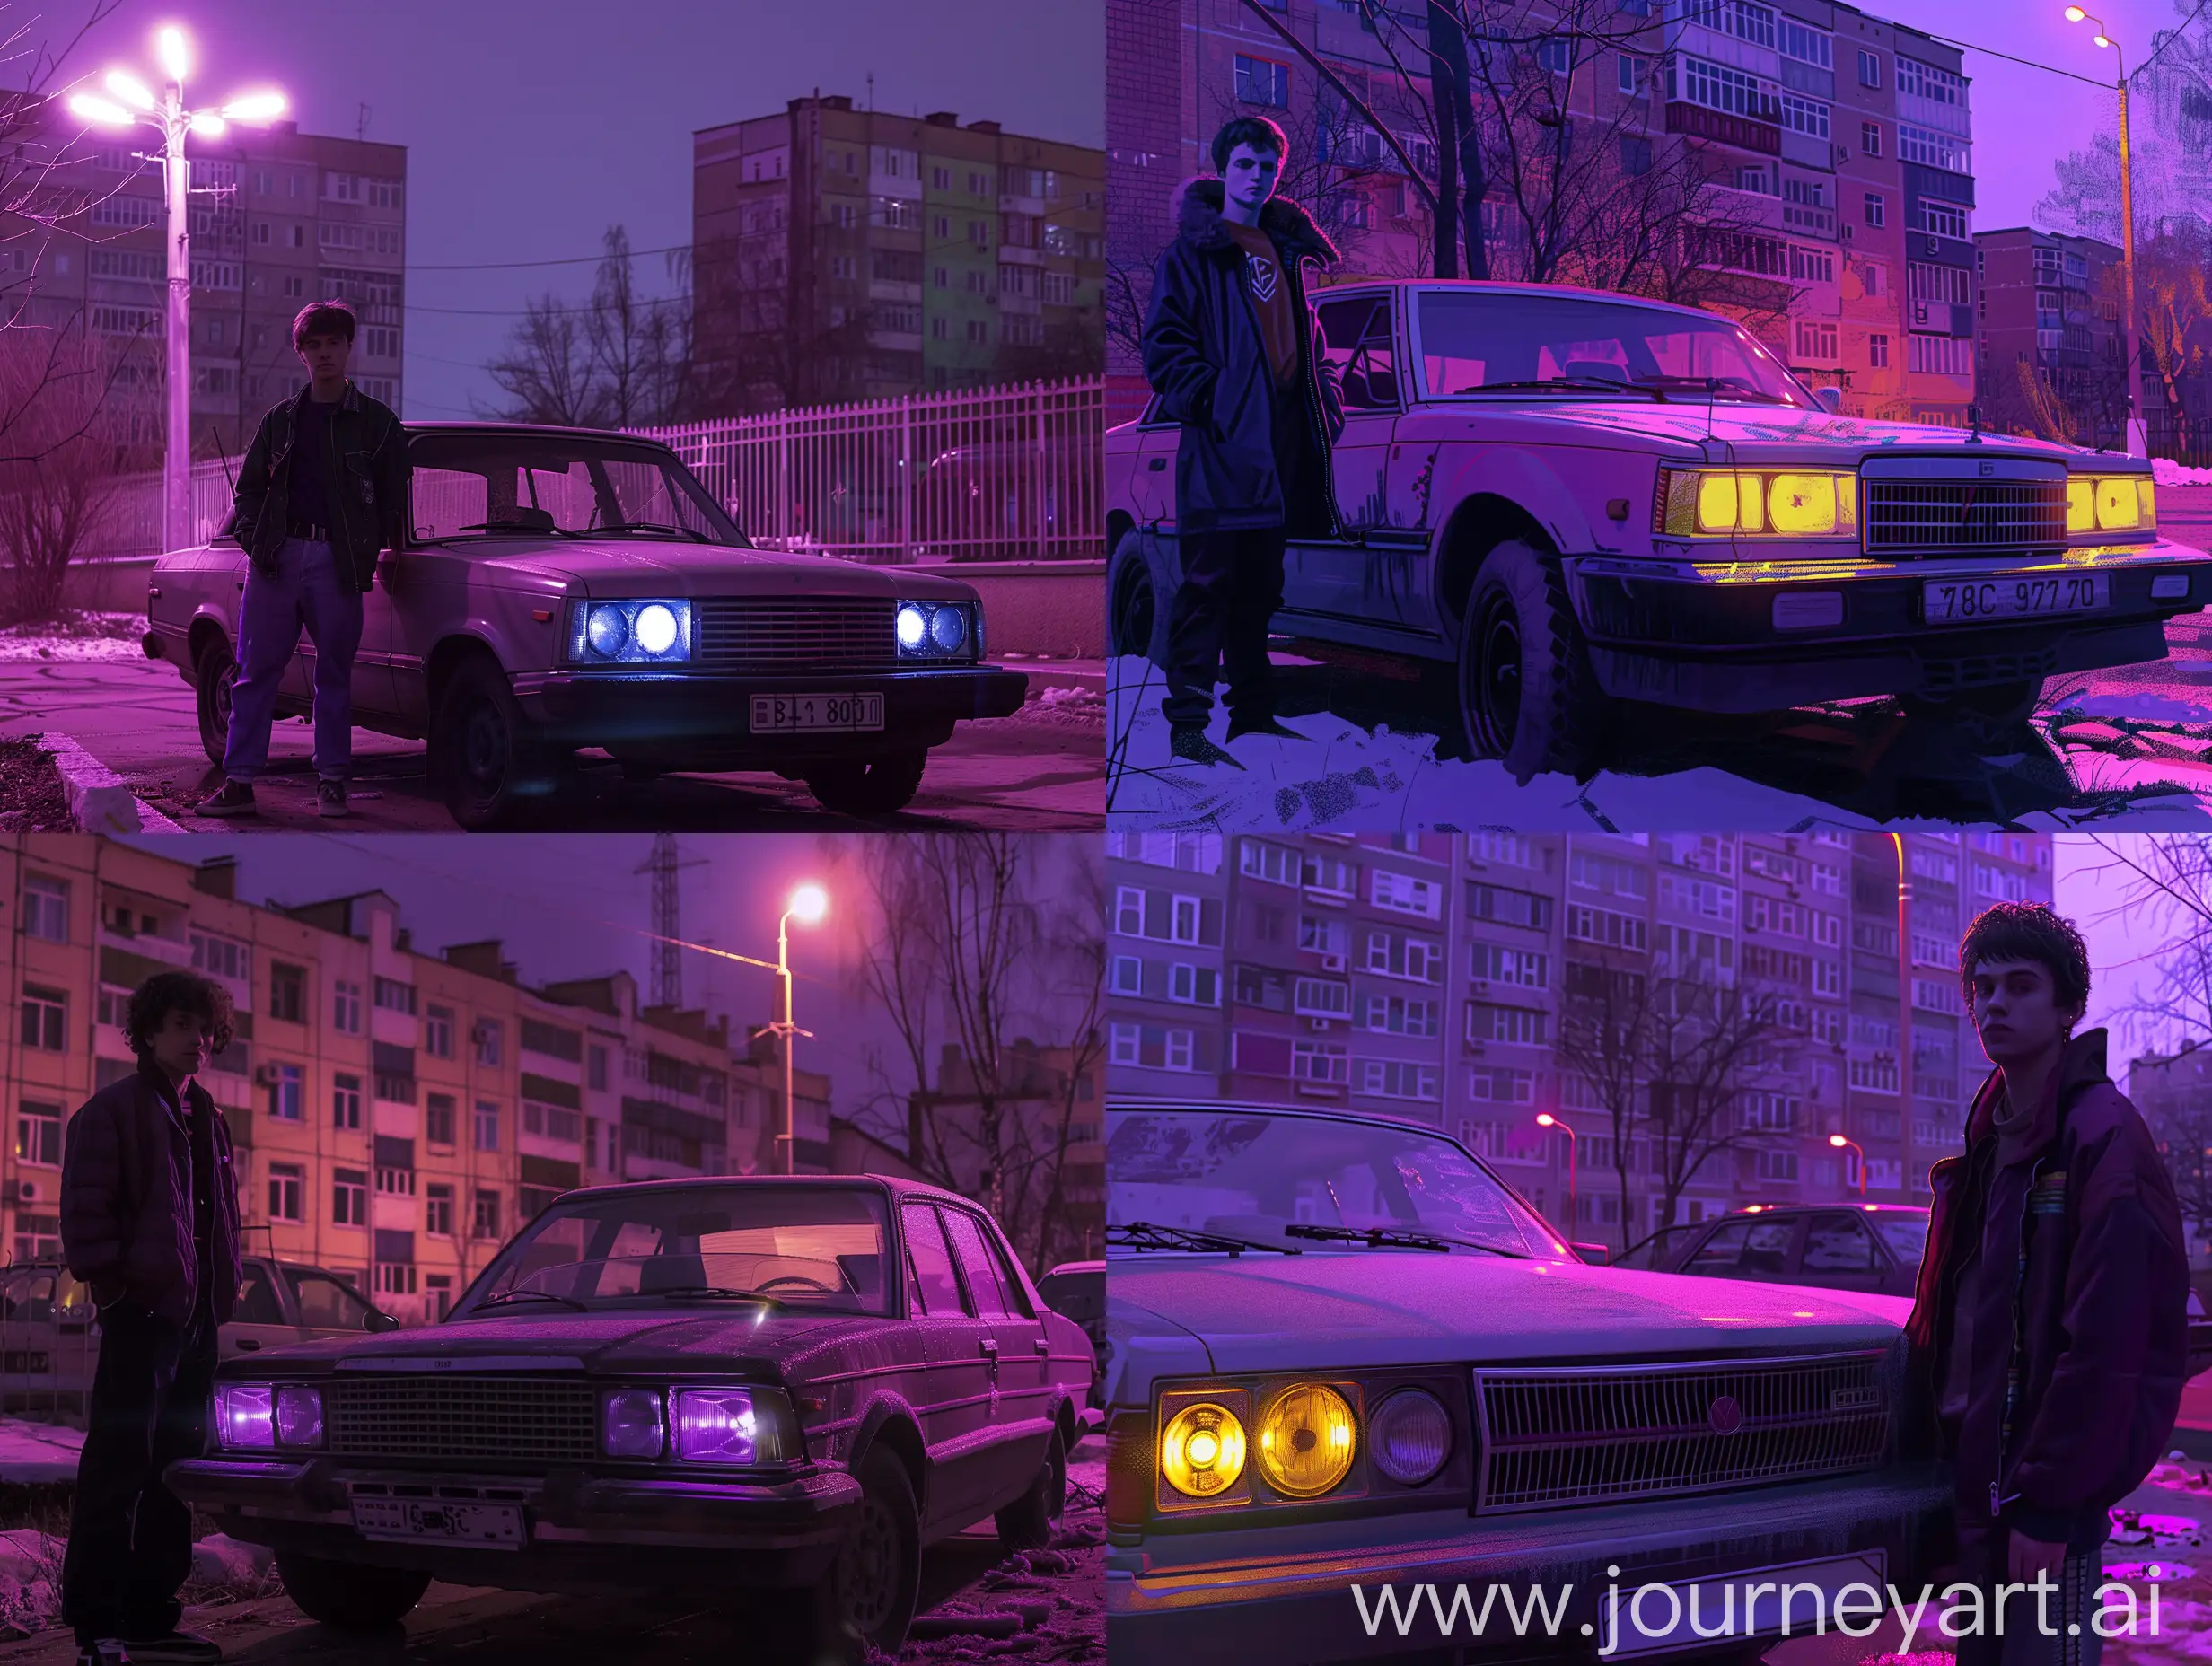 Style: Close photo. Realistic art;
Scene: Spring purple night in post-soviet city residental area;
Image: young gay stands near his 80's soviet sedan with plastic grille. Sedan has turned on headlights